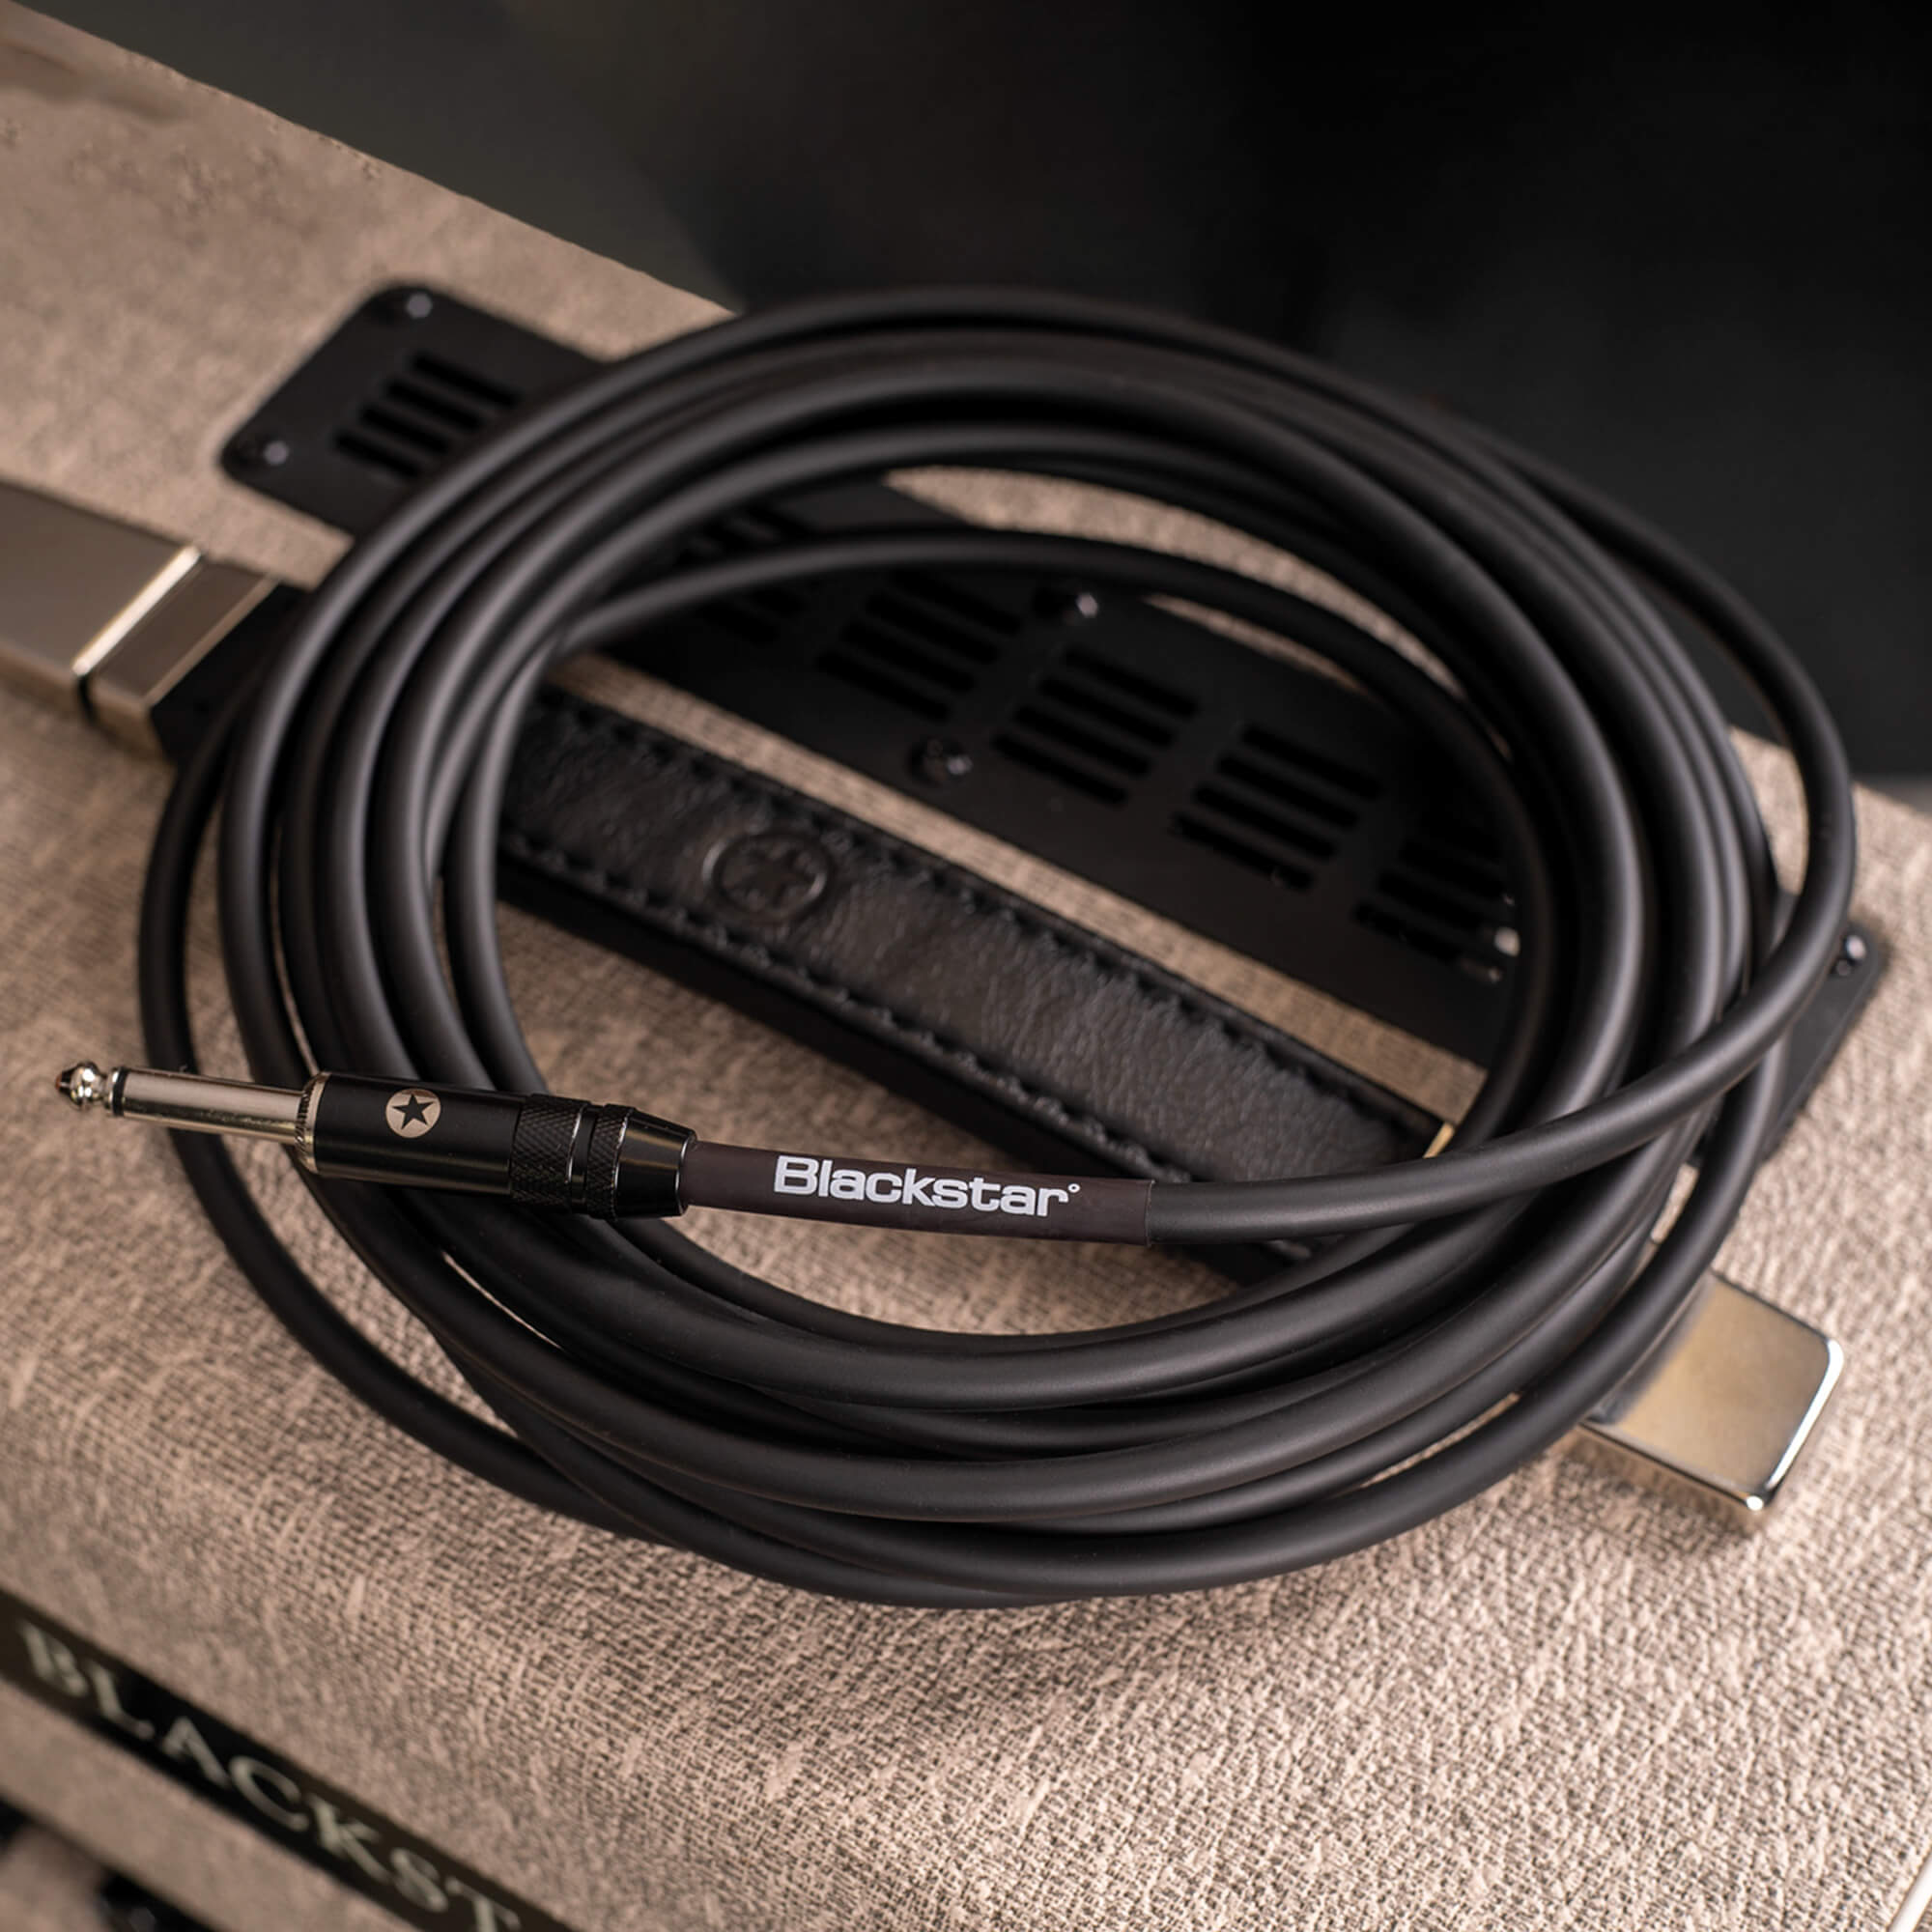 Blackstar instrument cable on top of amplifier